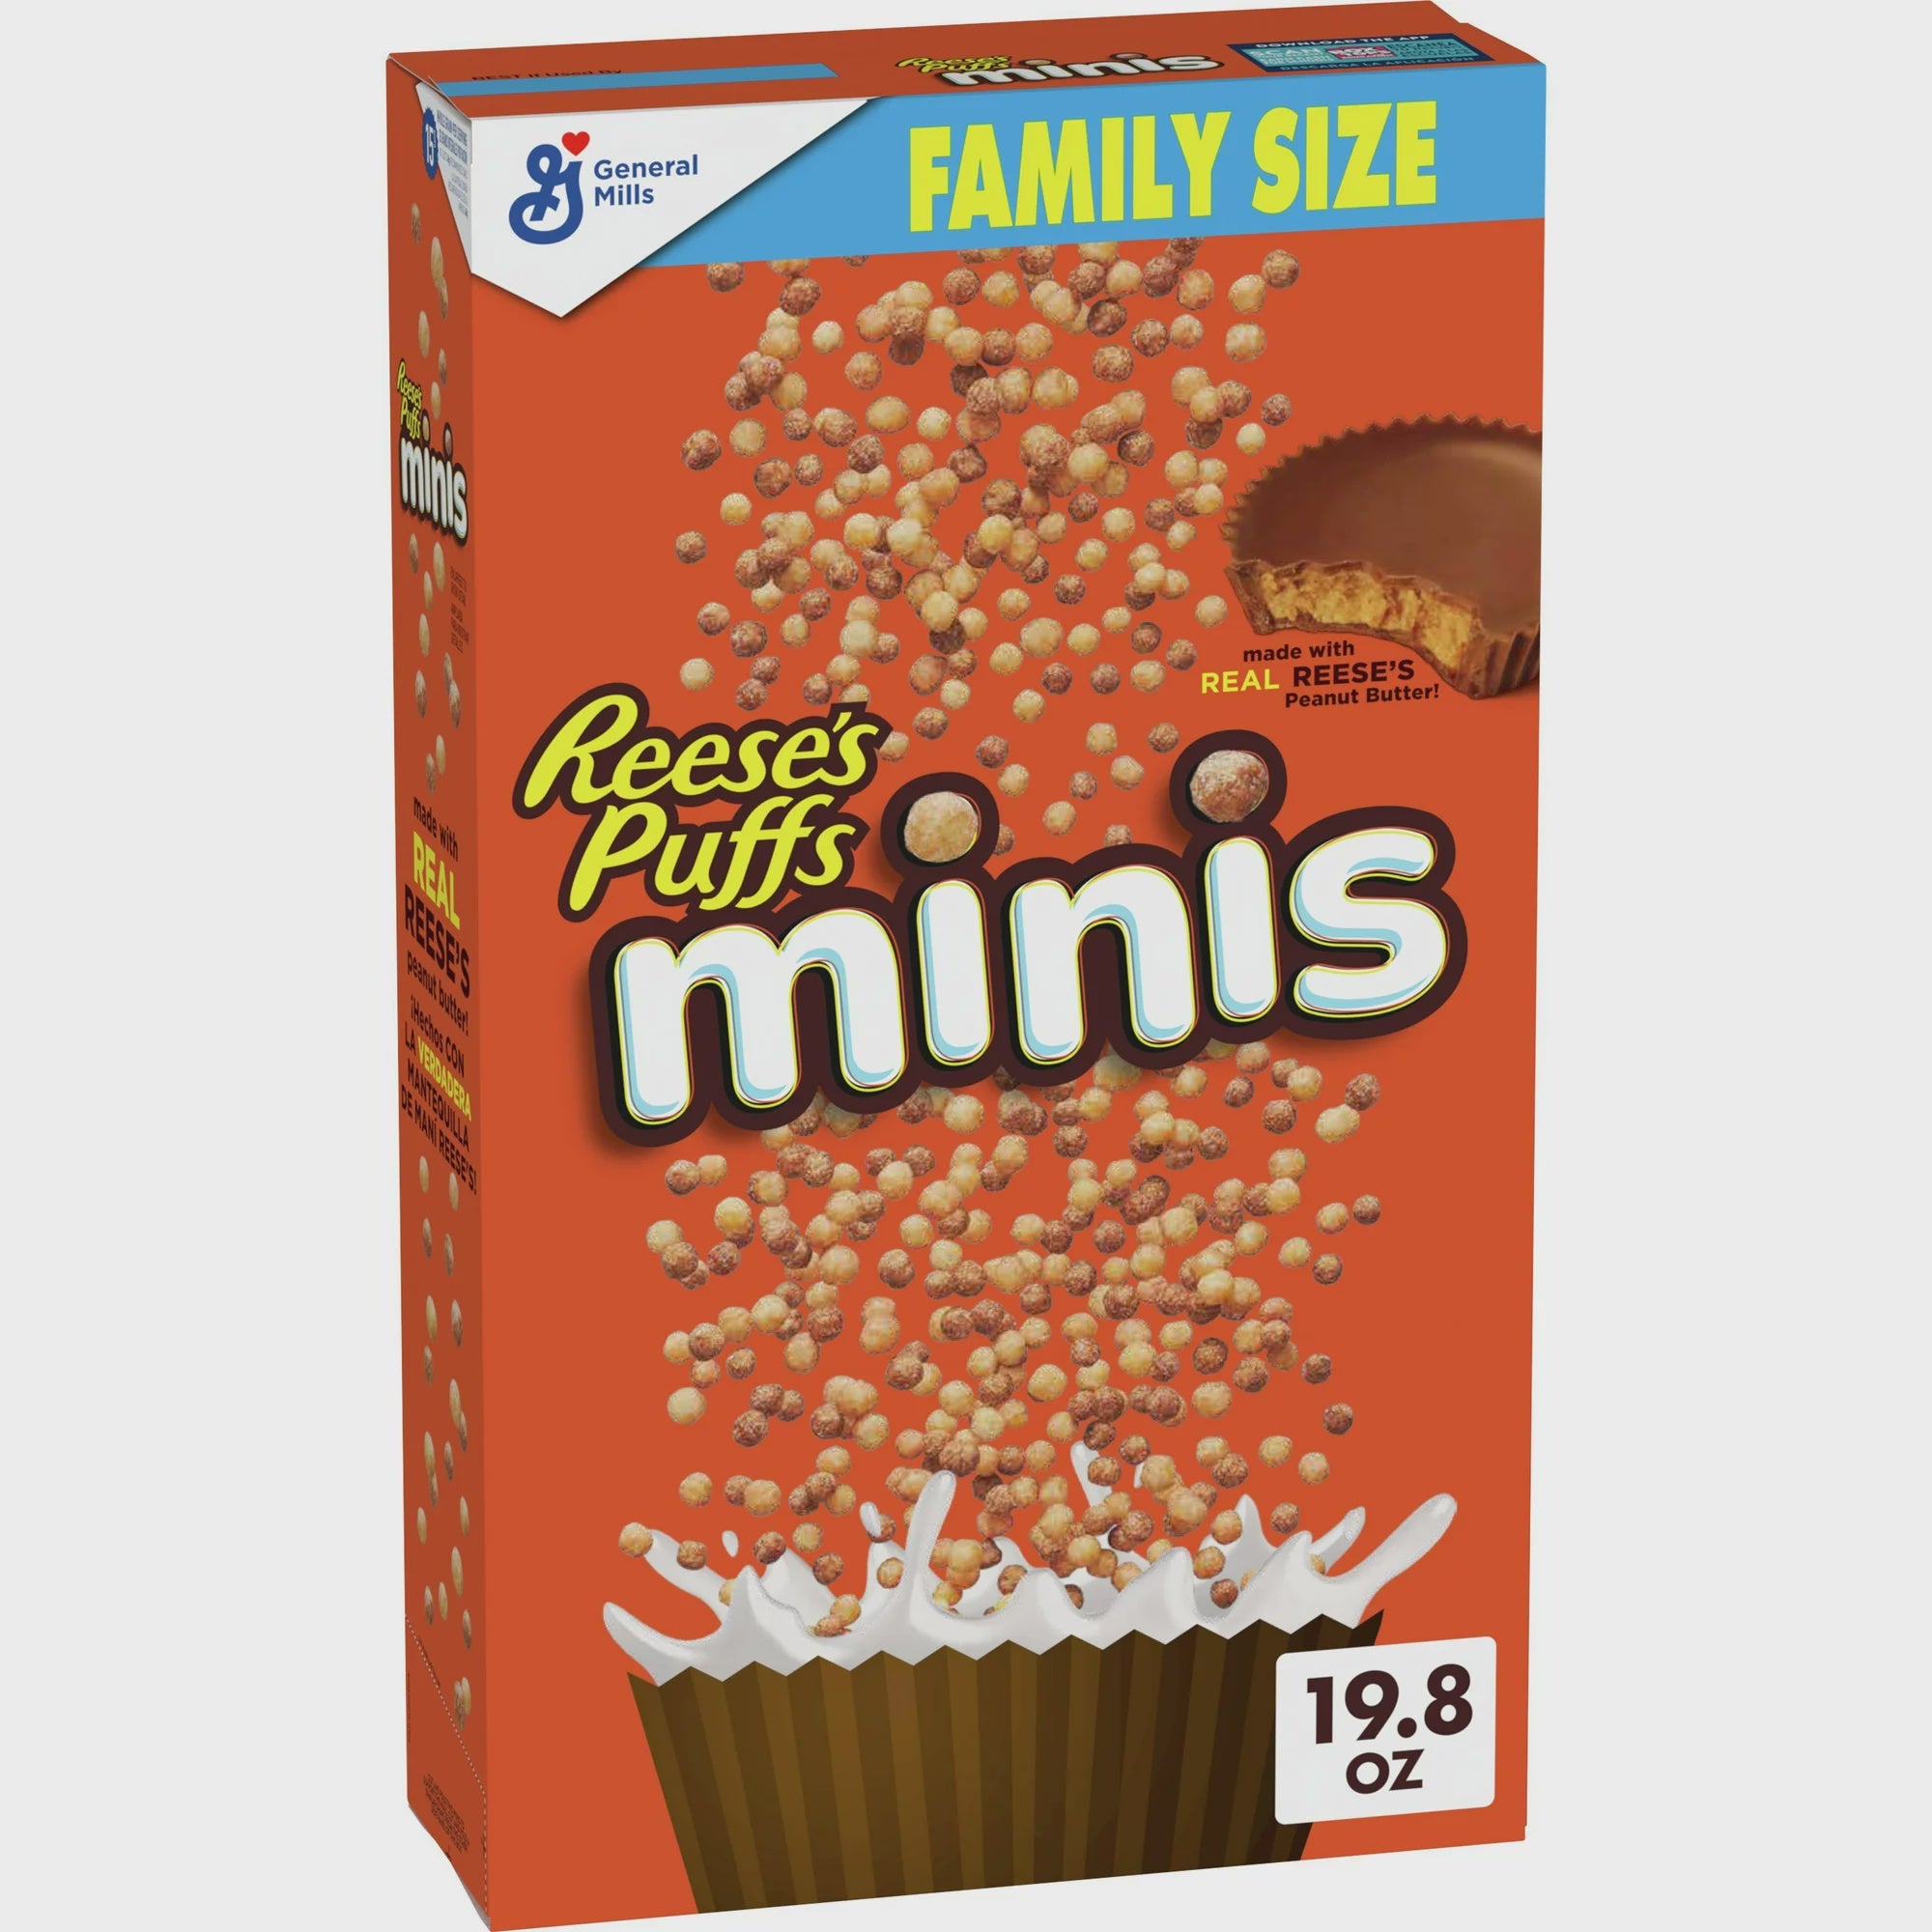 REESE'S PUFFS Minis Breakfast Cereal 19.8 oz